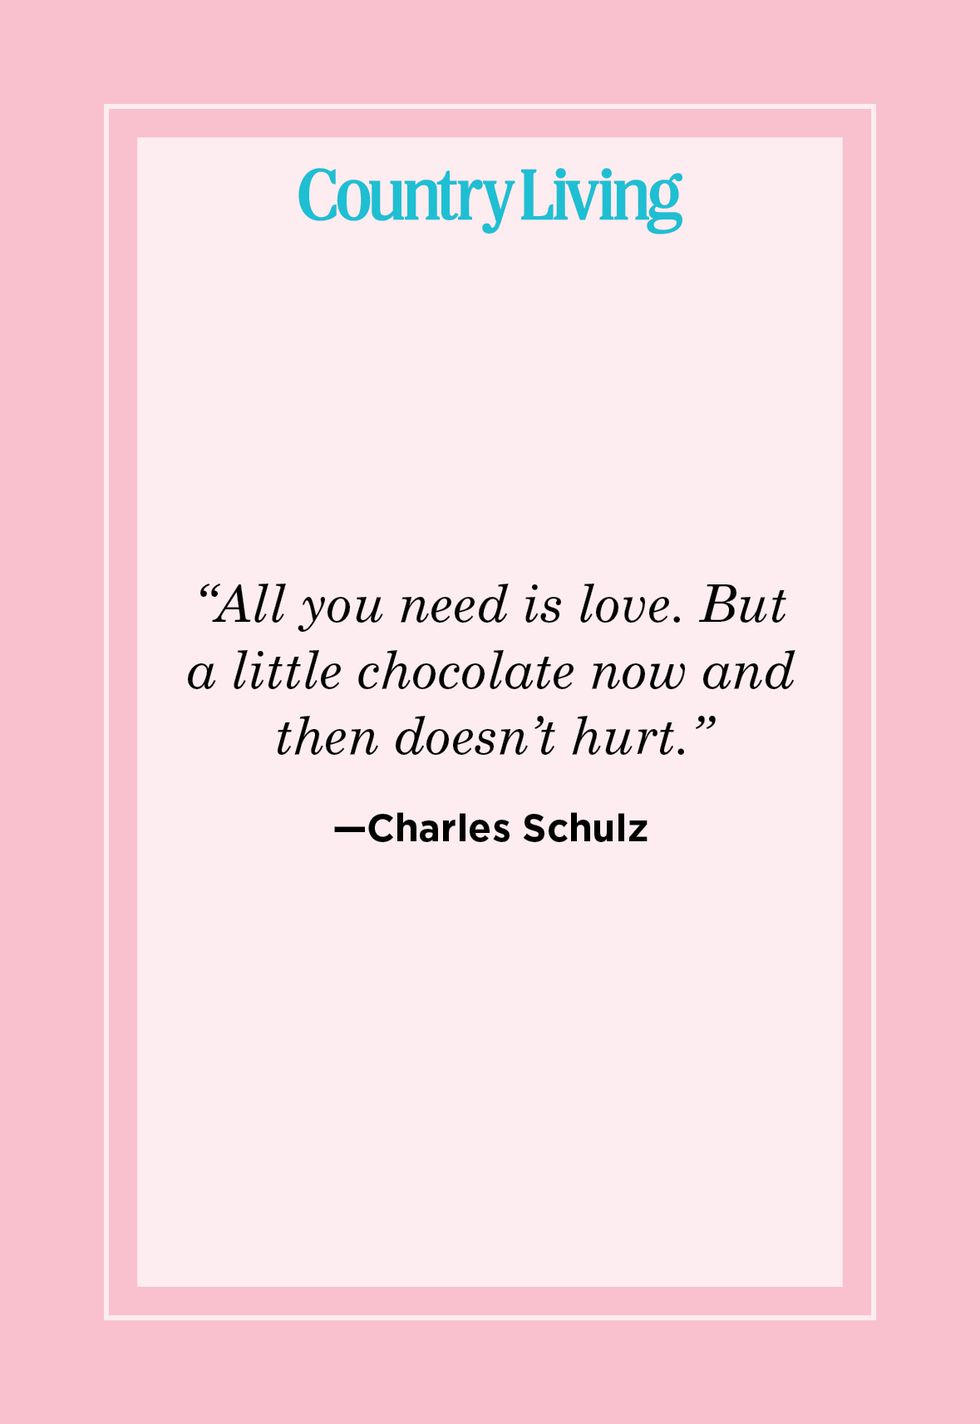 funny, cute love quote for him by charles schulz